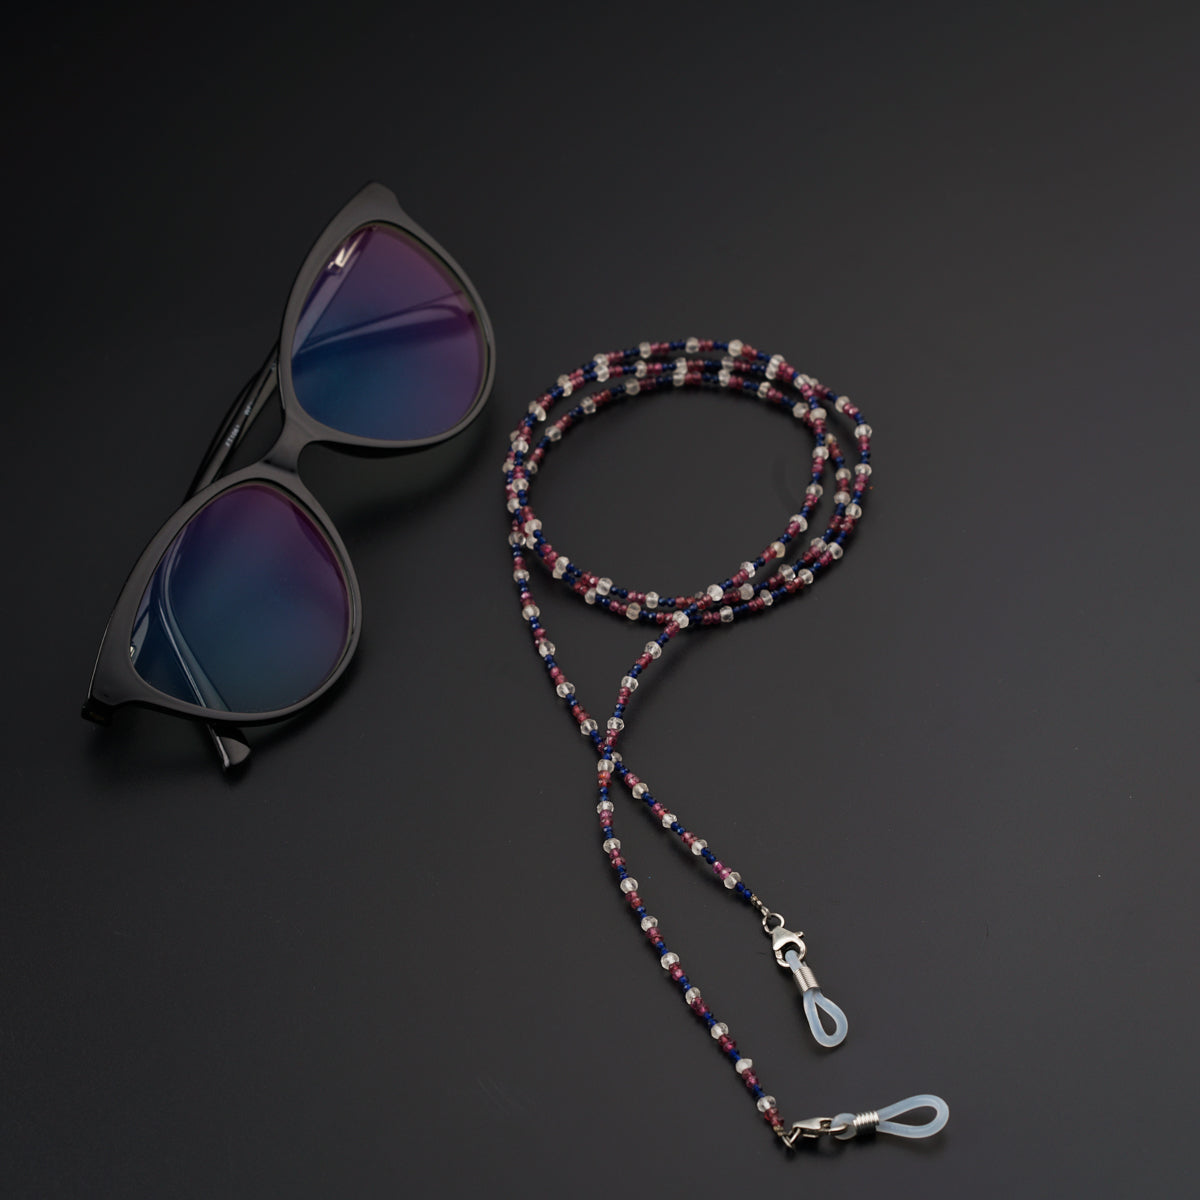 a pair of sunglasses and a lanyard on a black surface